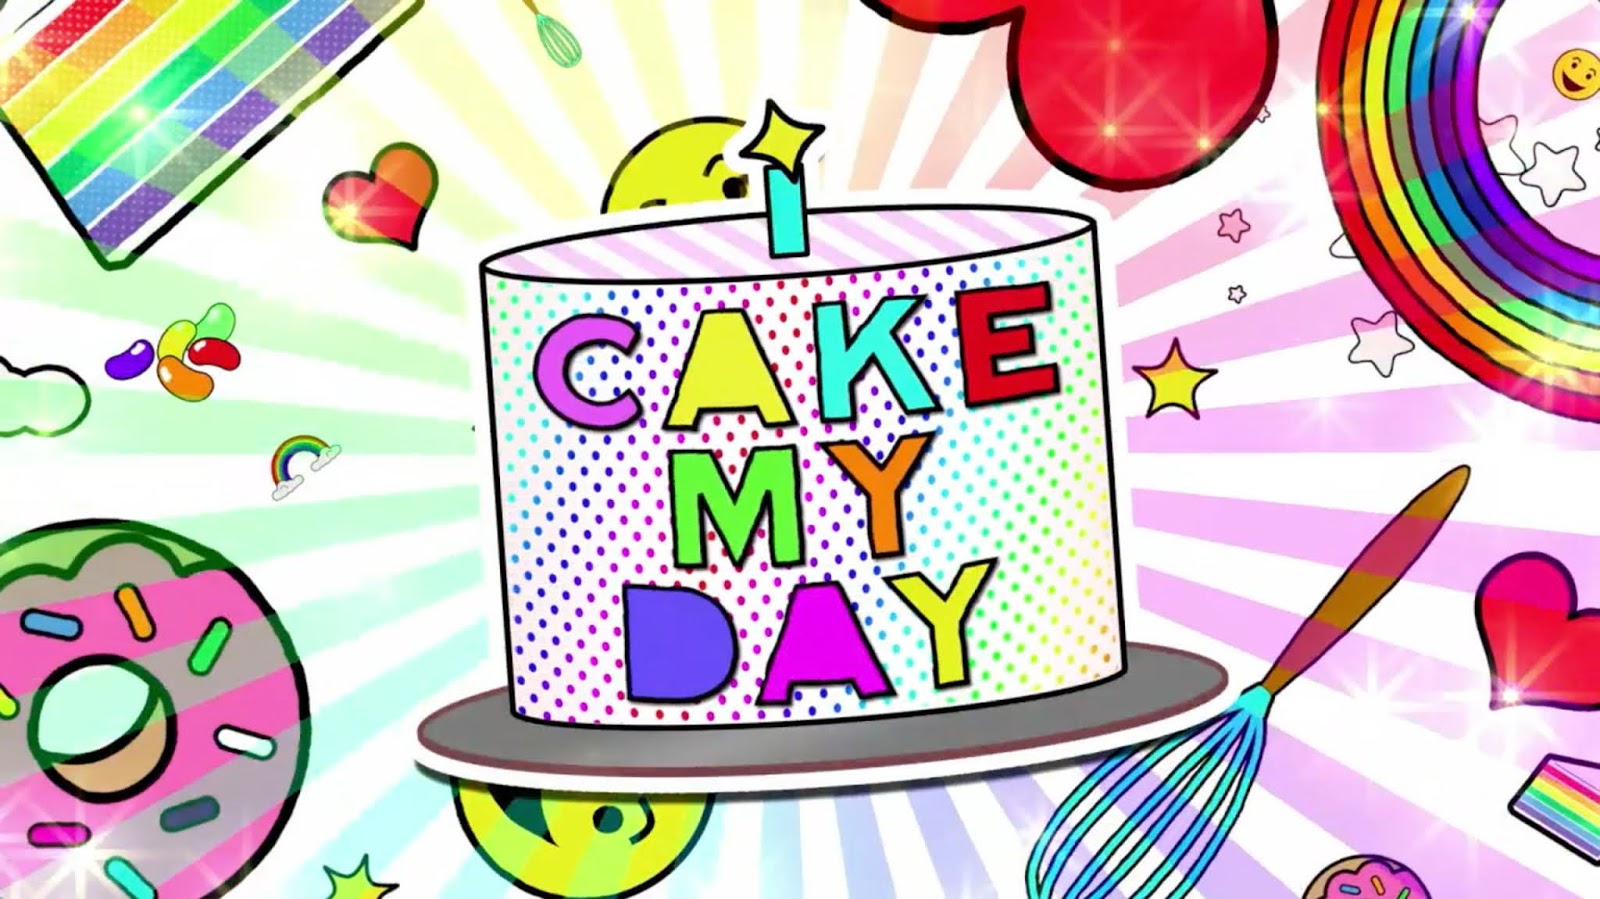 cake my day🎂🍰 | Rabwah | Instagram photos and videos